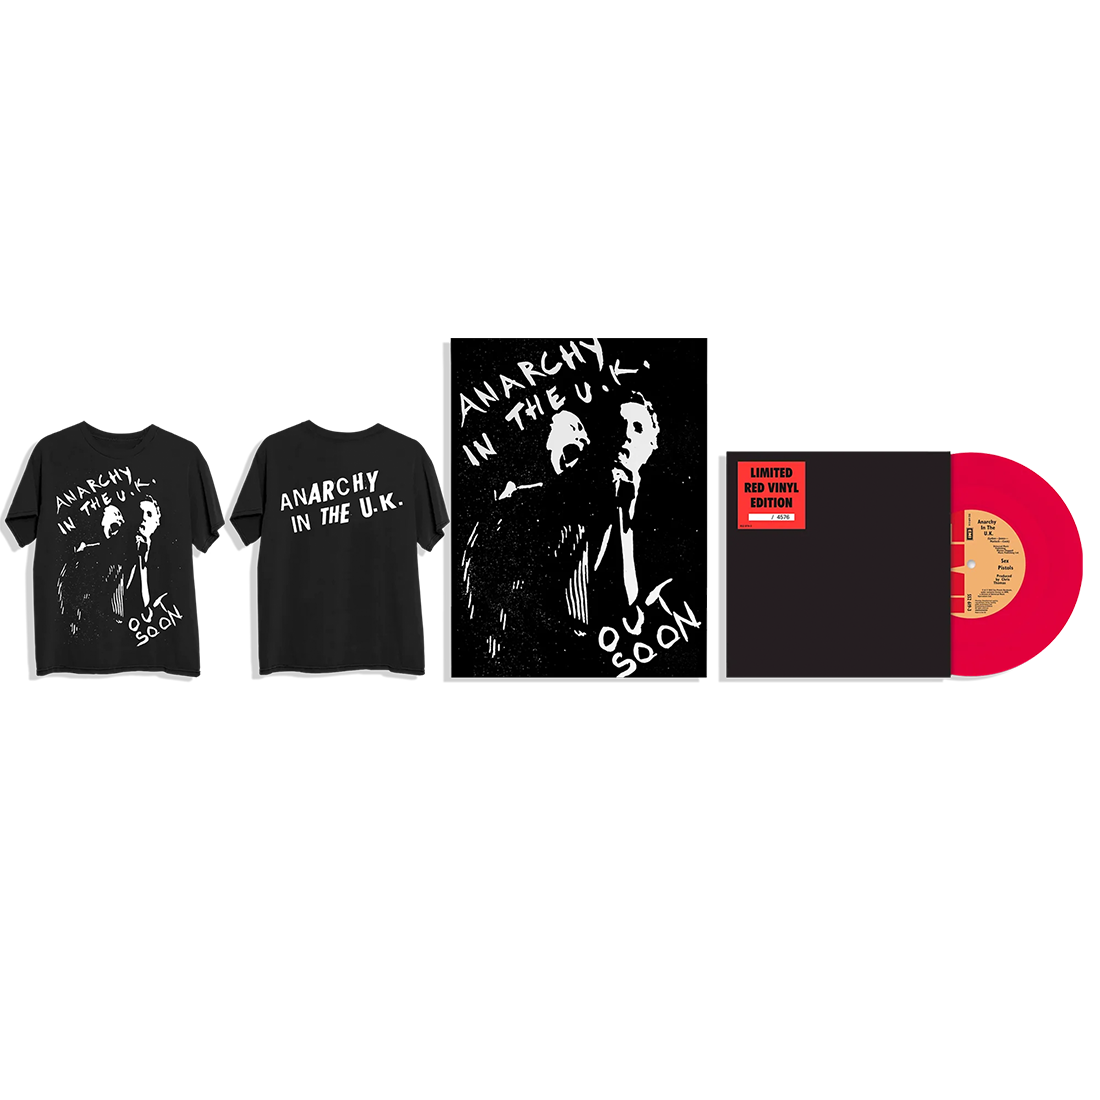 Anarchy in The UK: Exclusive Red Vinyl 7" + Anarchy in the UK Out Soon Black T-Shirt  + Anarchy in the UK Out Soon Poster